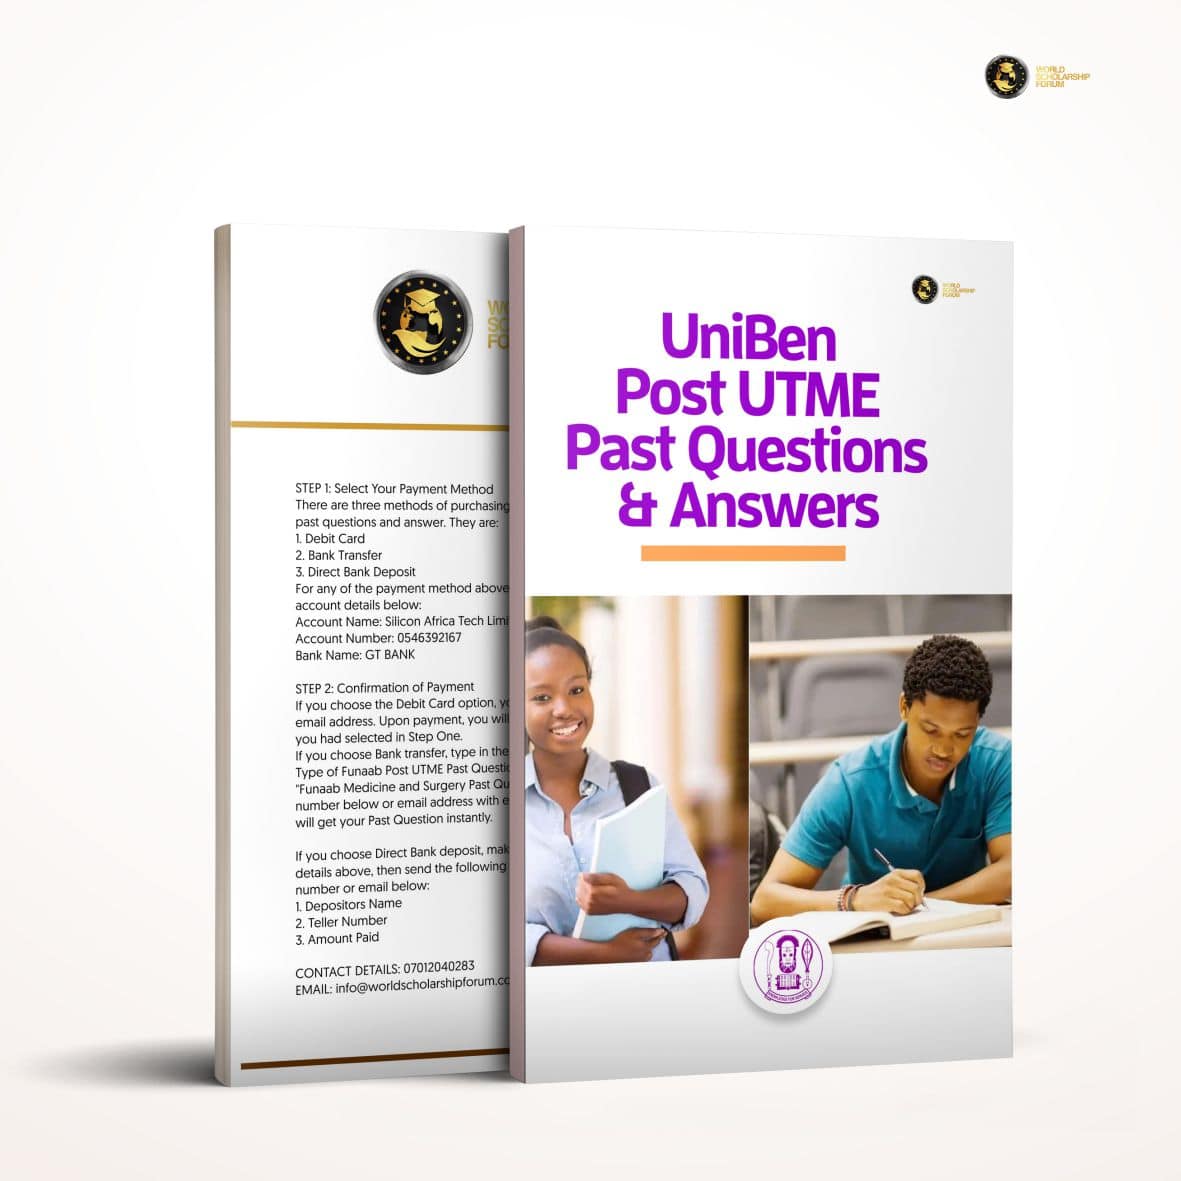 uniben-post-utme-past-questions-answers